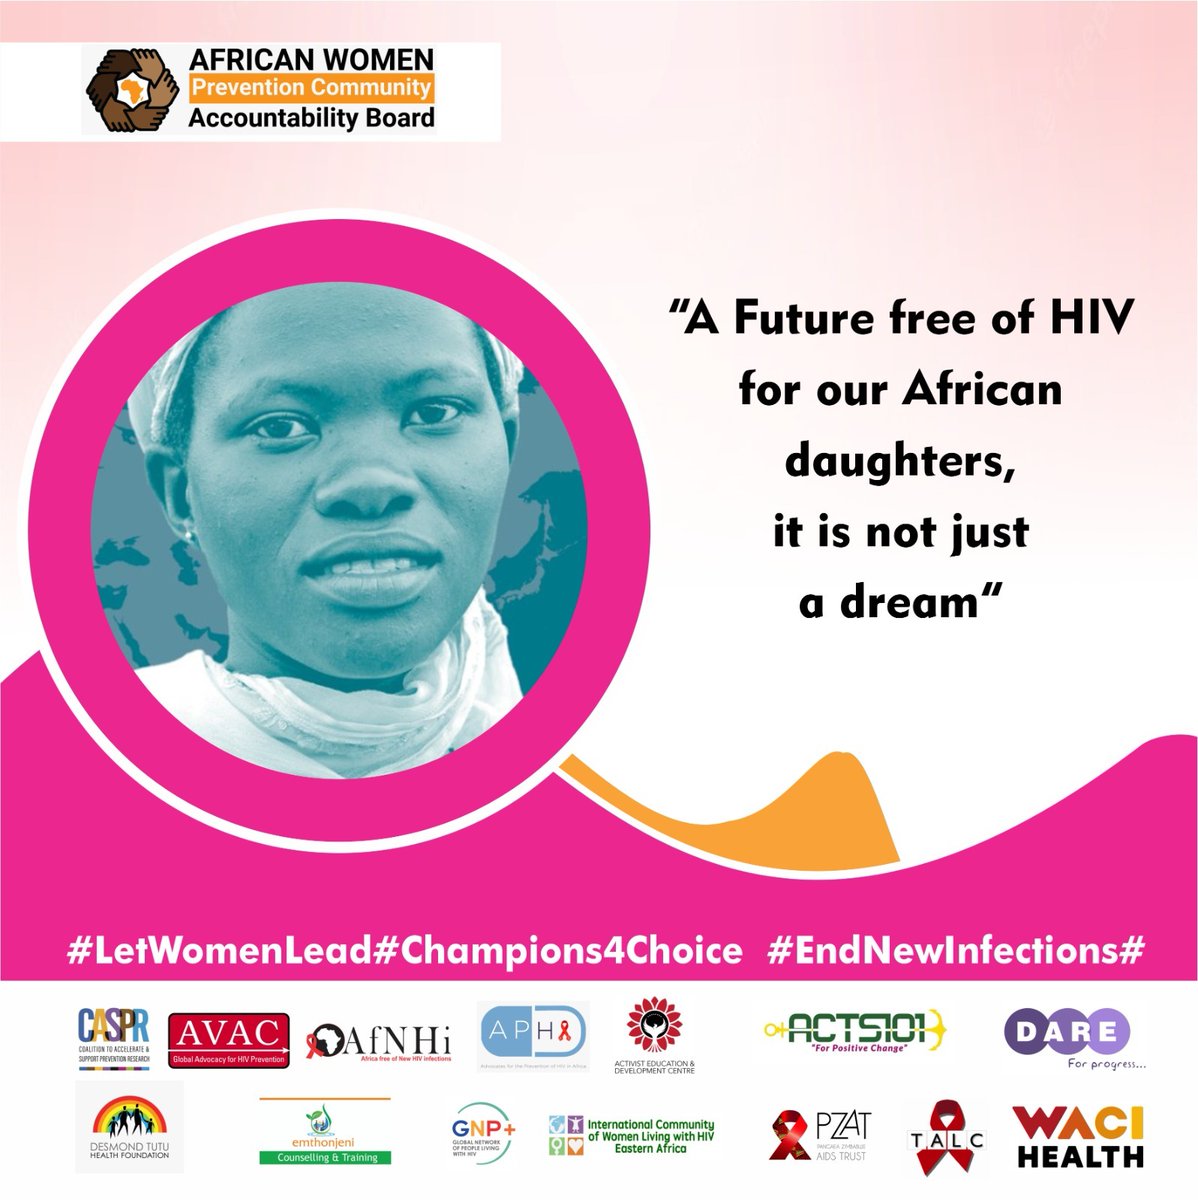 A Future free of HIV for our african daughters, it
is not just a dream #EndNewInfections; it's our mission
#ChoiceManifesto @AfNHi_Tweets @WACIHealth